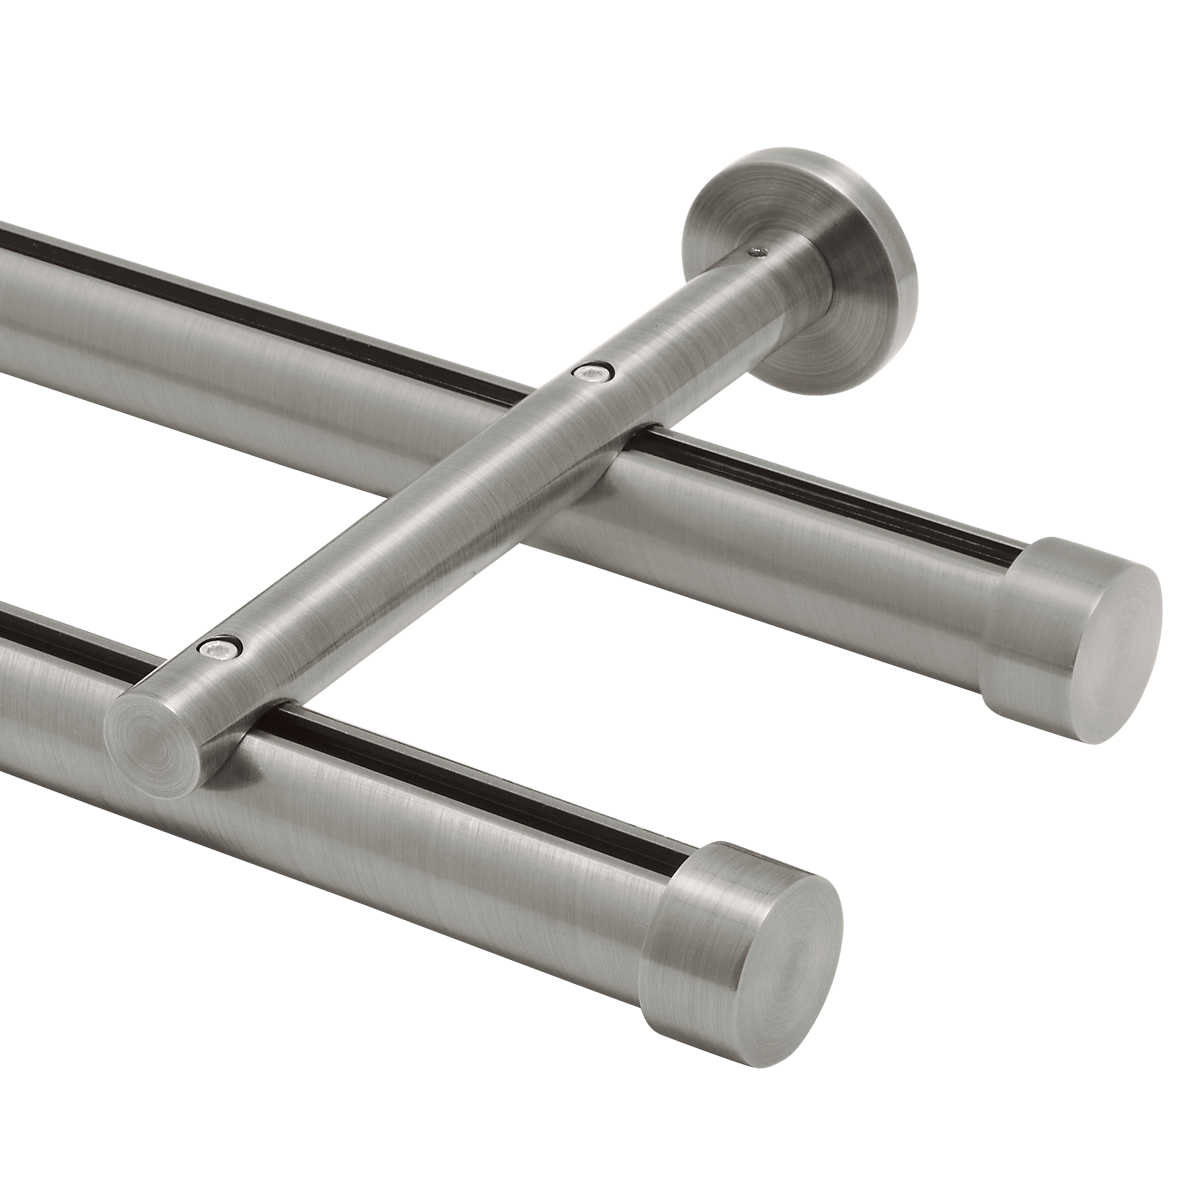 https://rowleycompany.scene7.com/is/image/rowleycompany/aria-hrail-kit-double-rod-wall-mount-8ft-brushed-nickel-fmh28402-8-bn?$s7Product$&fmt=png-alpha